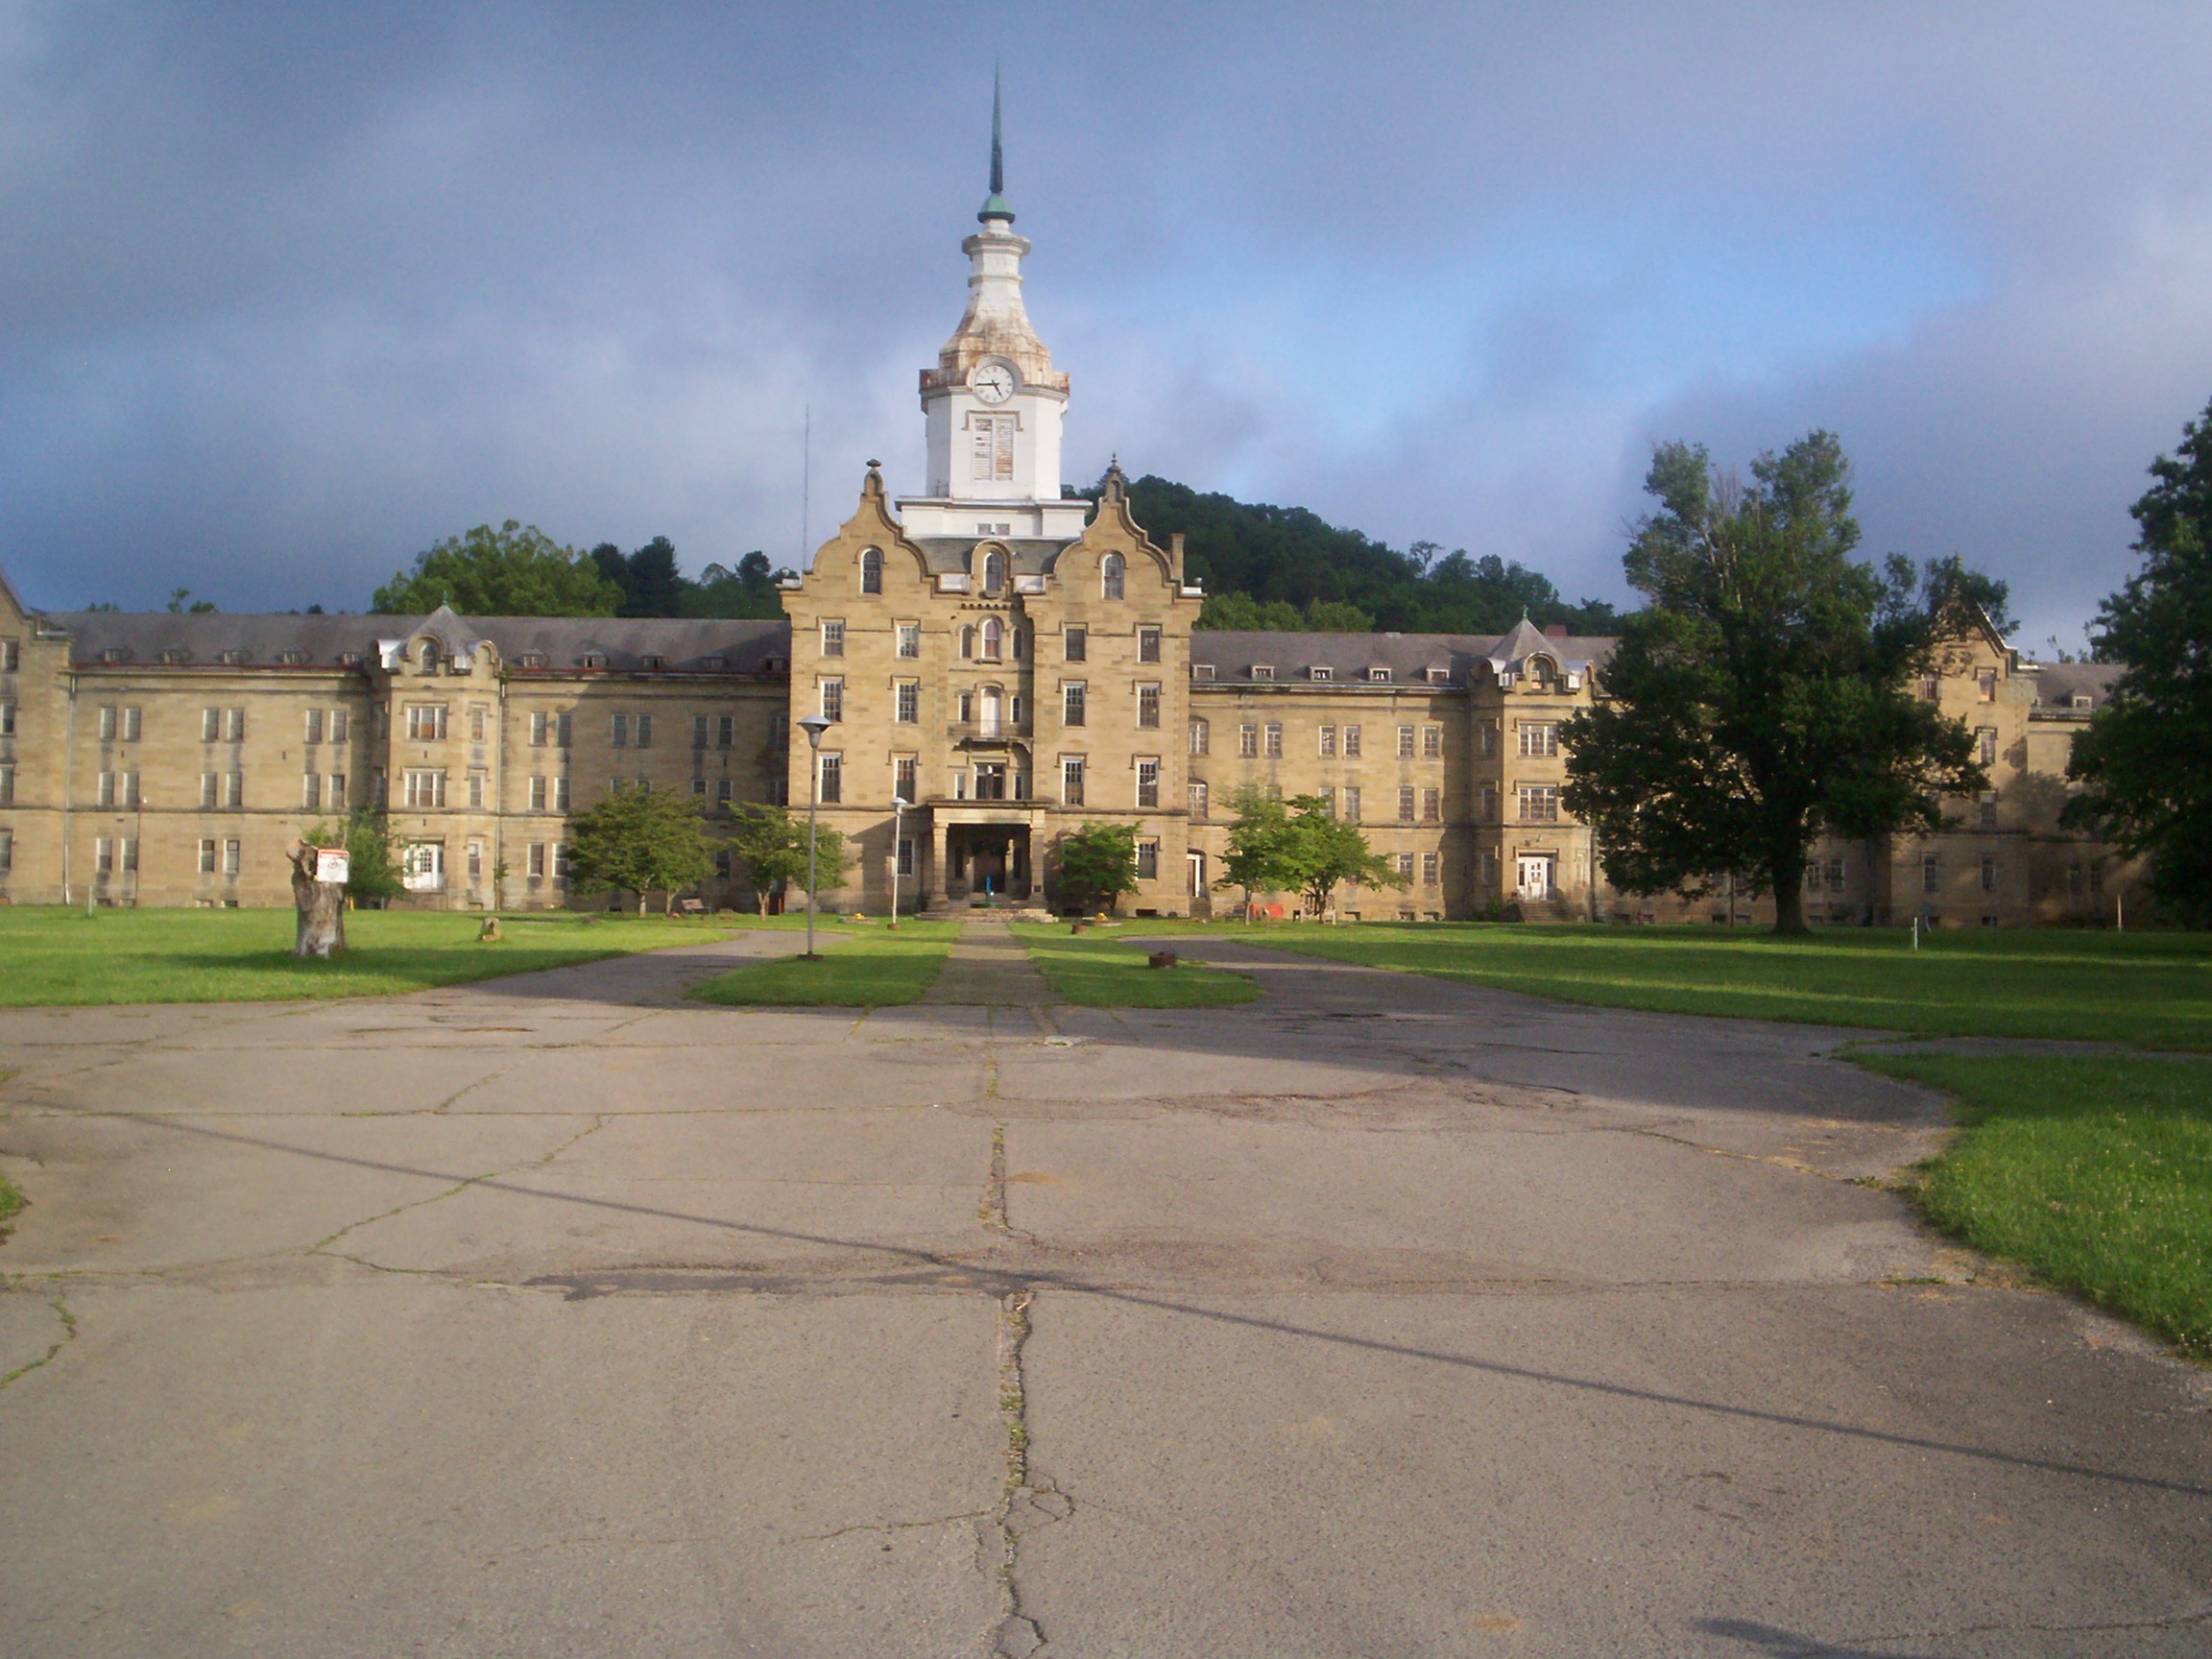 This is a pic I took of the former Weston State Hospital a few days ago.  The place was closed in 1995 I think.